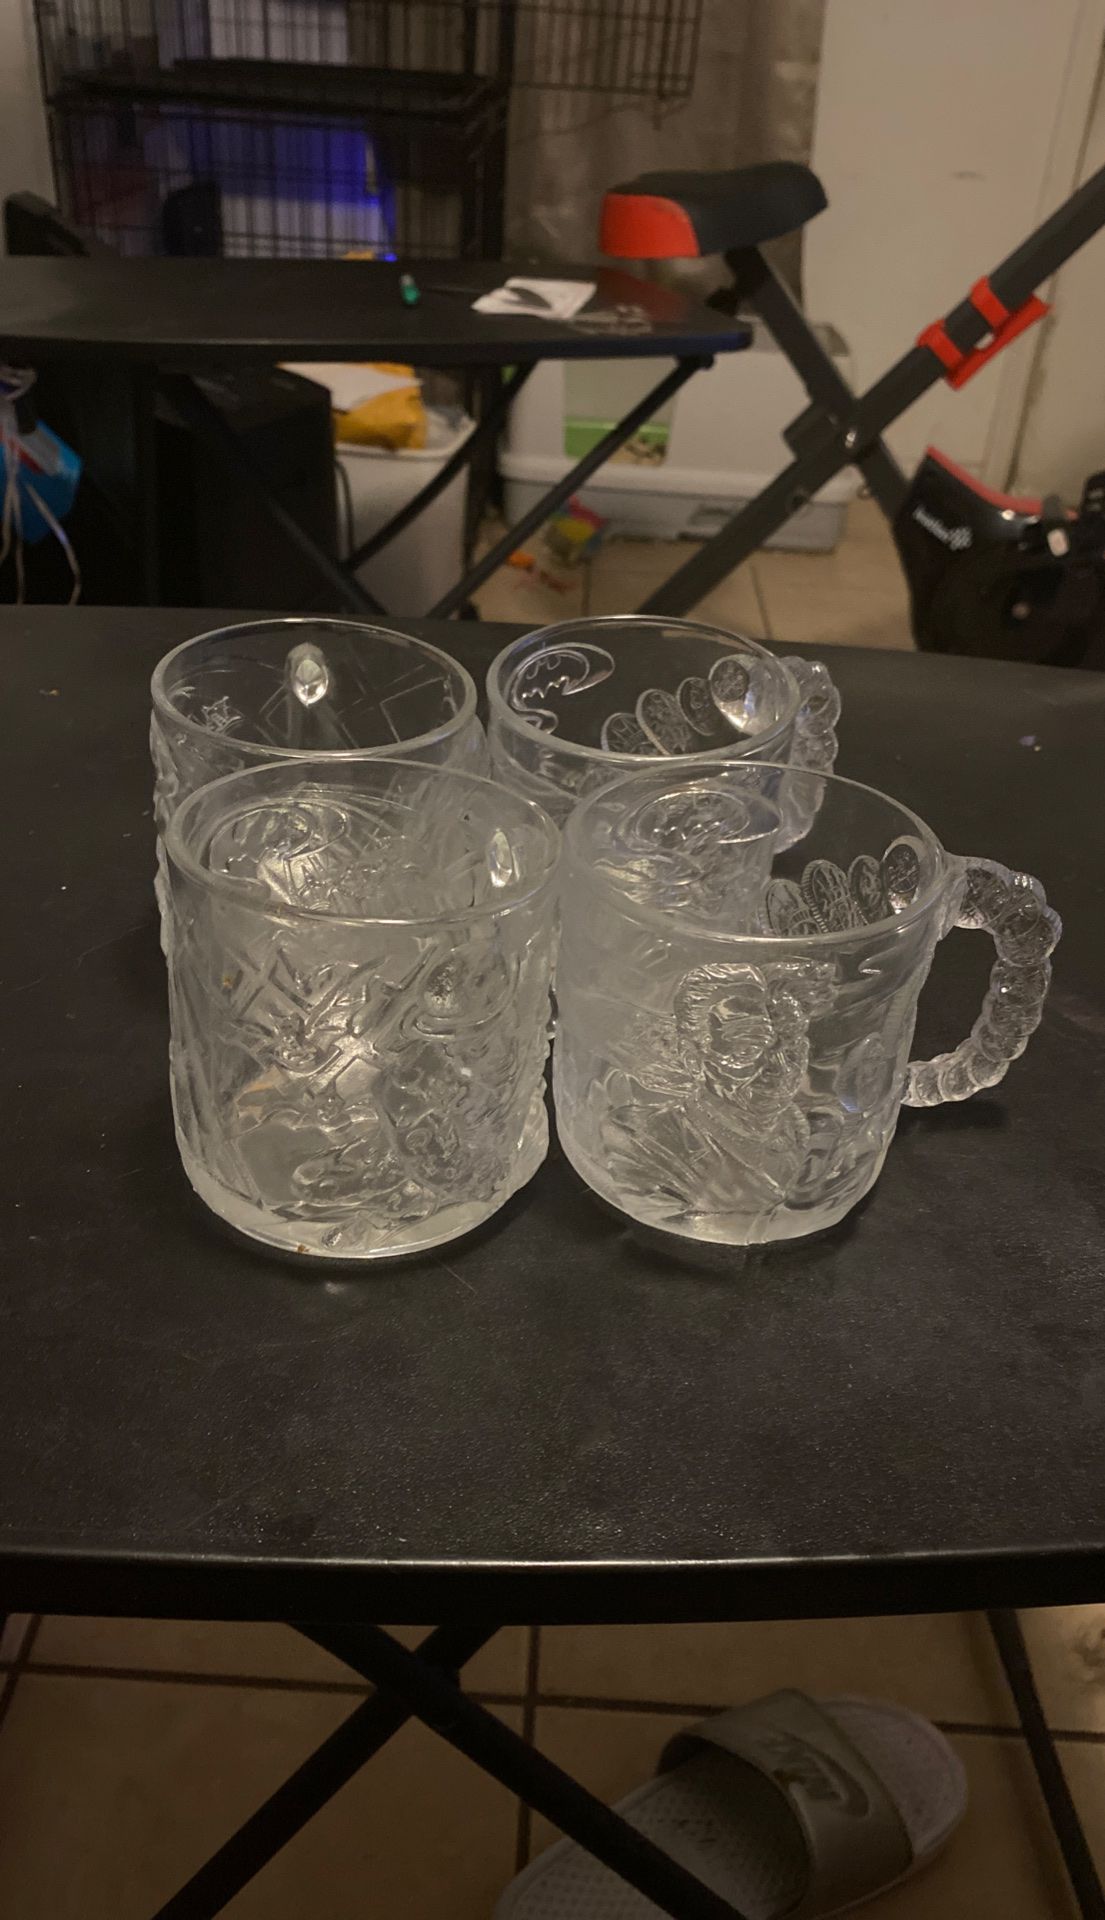 McDonald’s riddler and twoface cup set